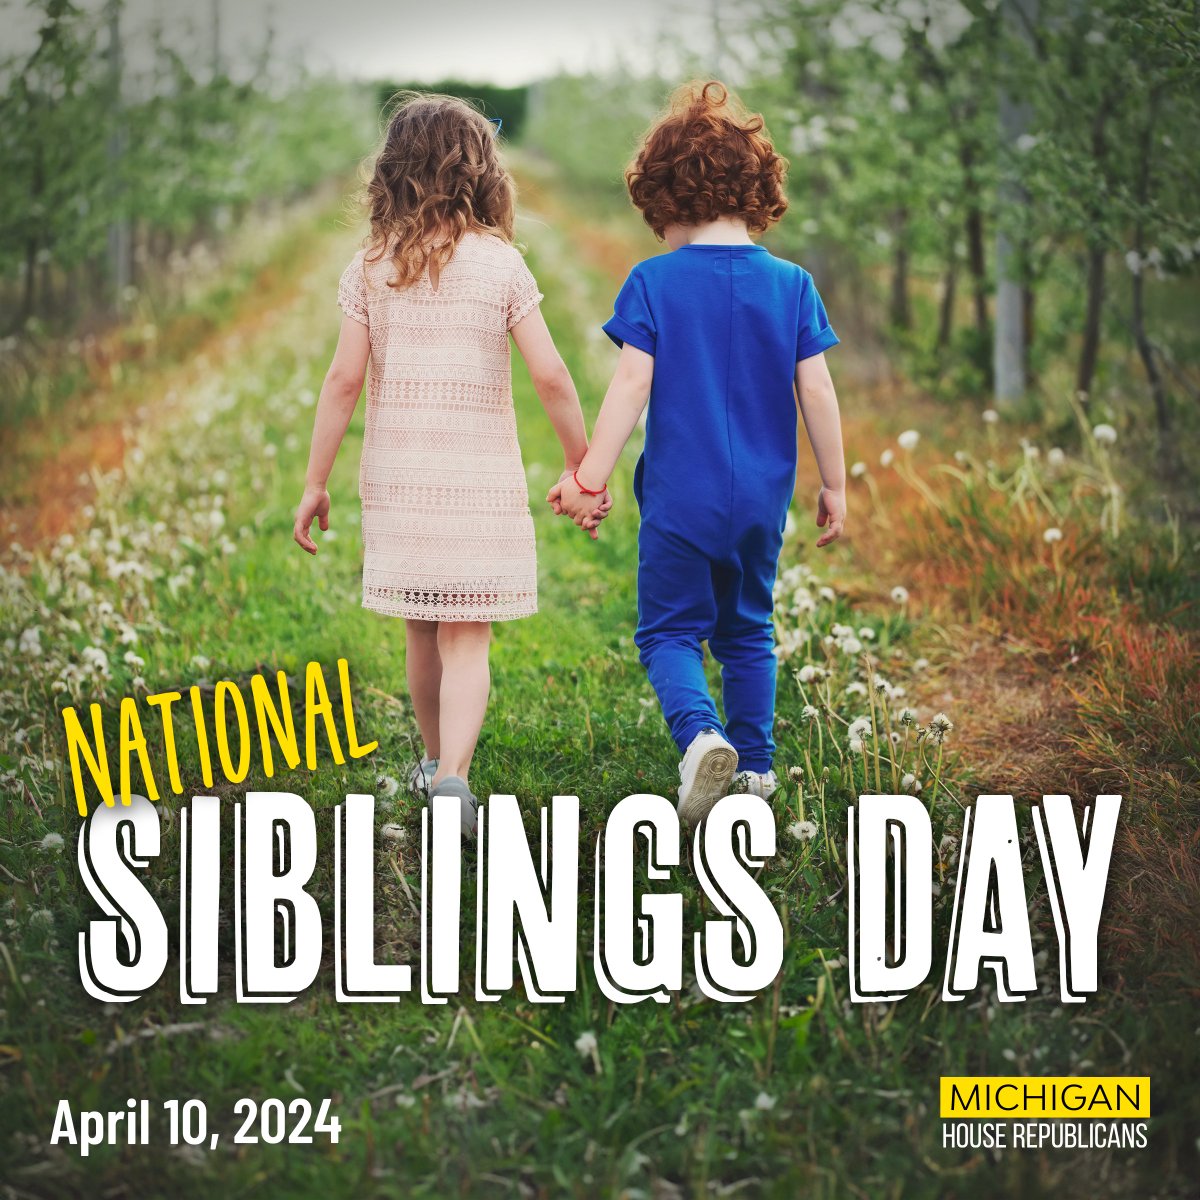 Wishing everyone a ​happy #NationalSiblingsDay!